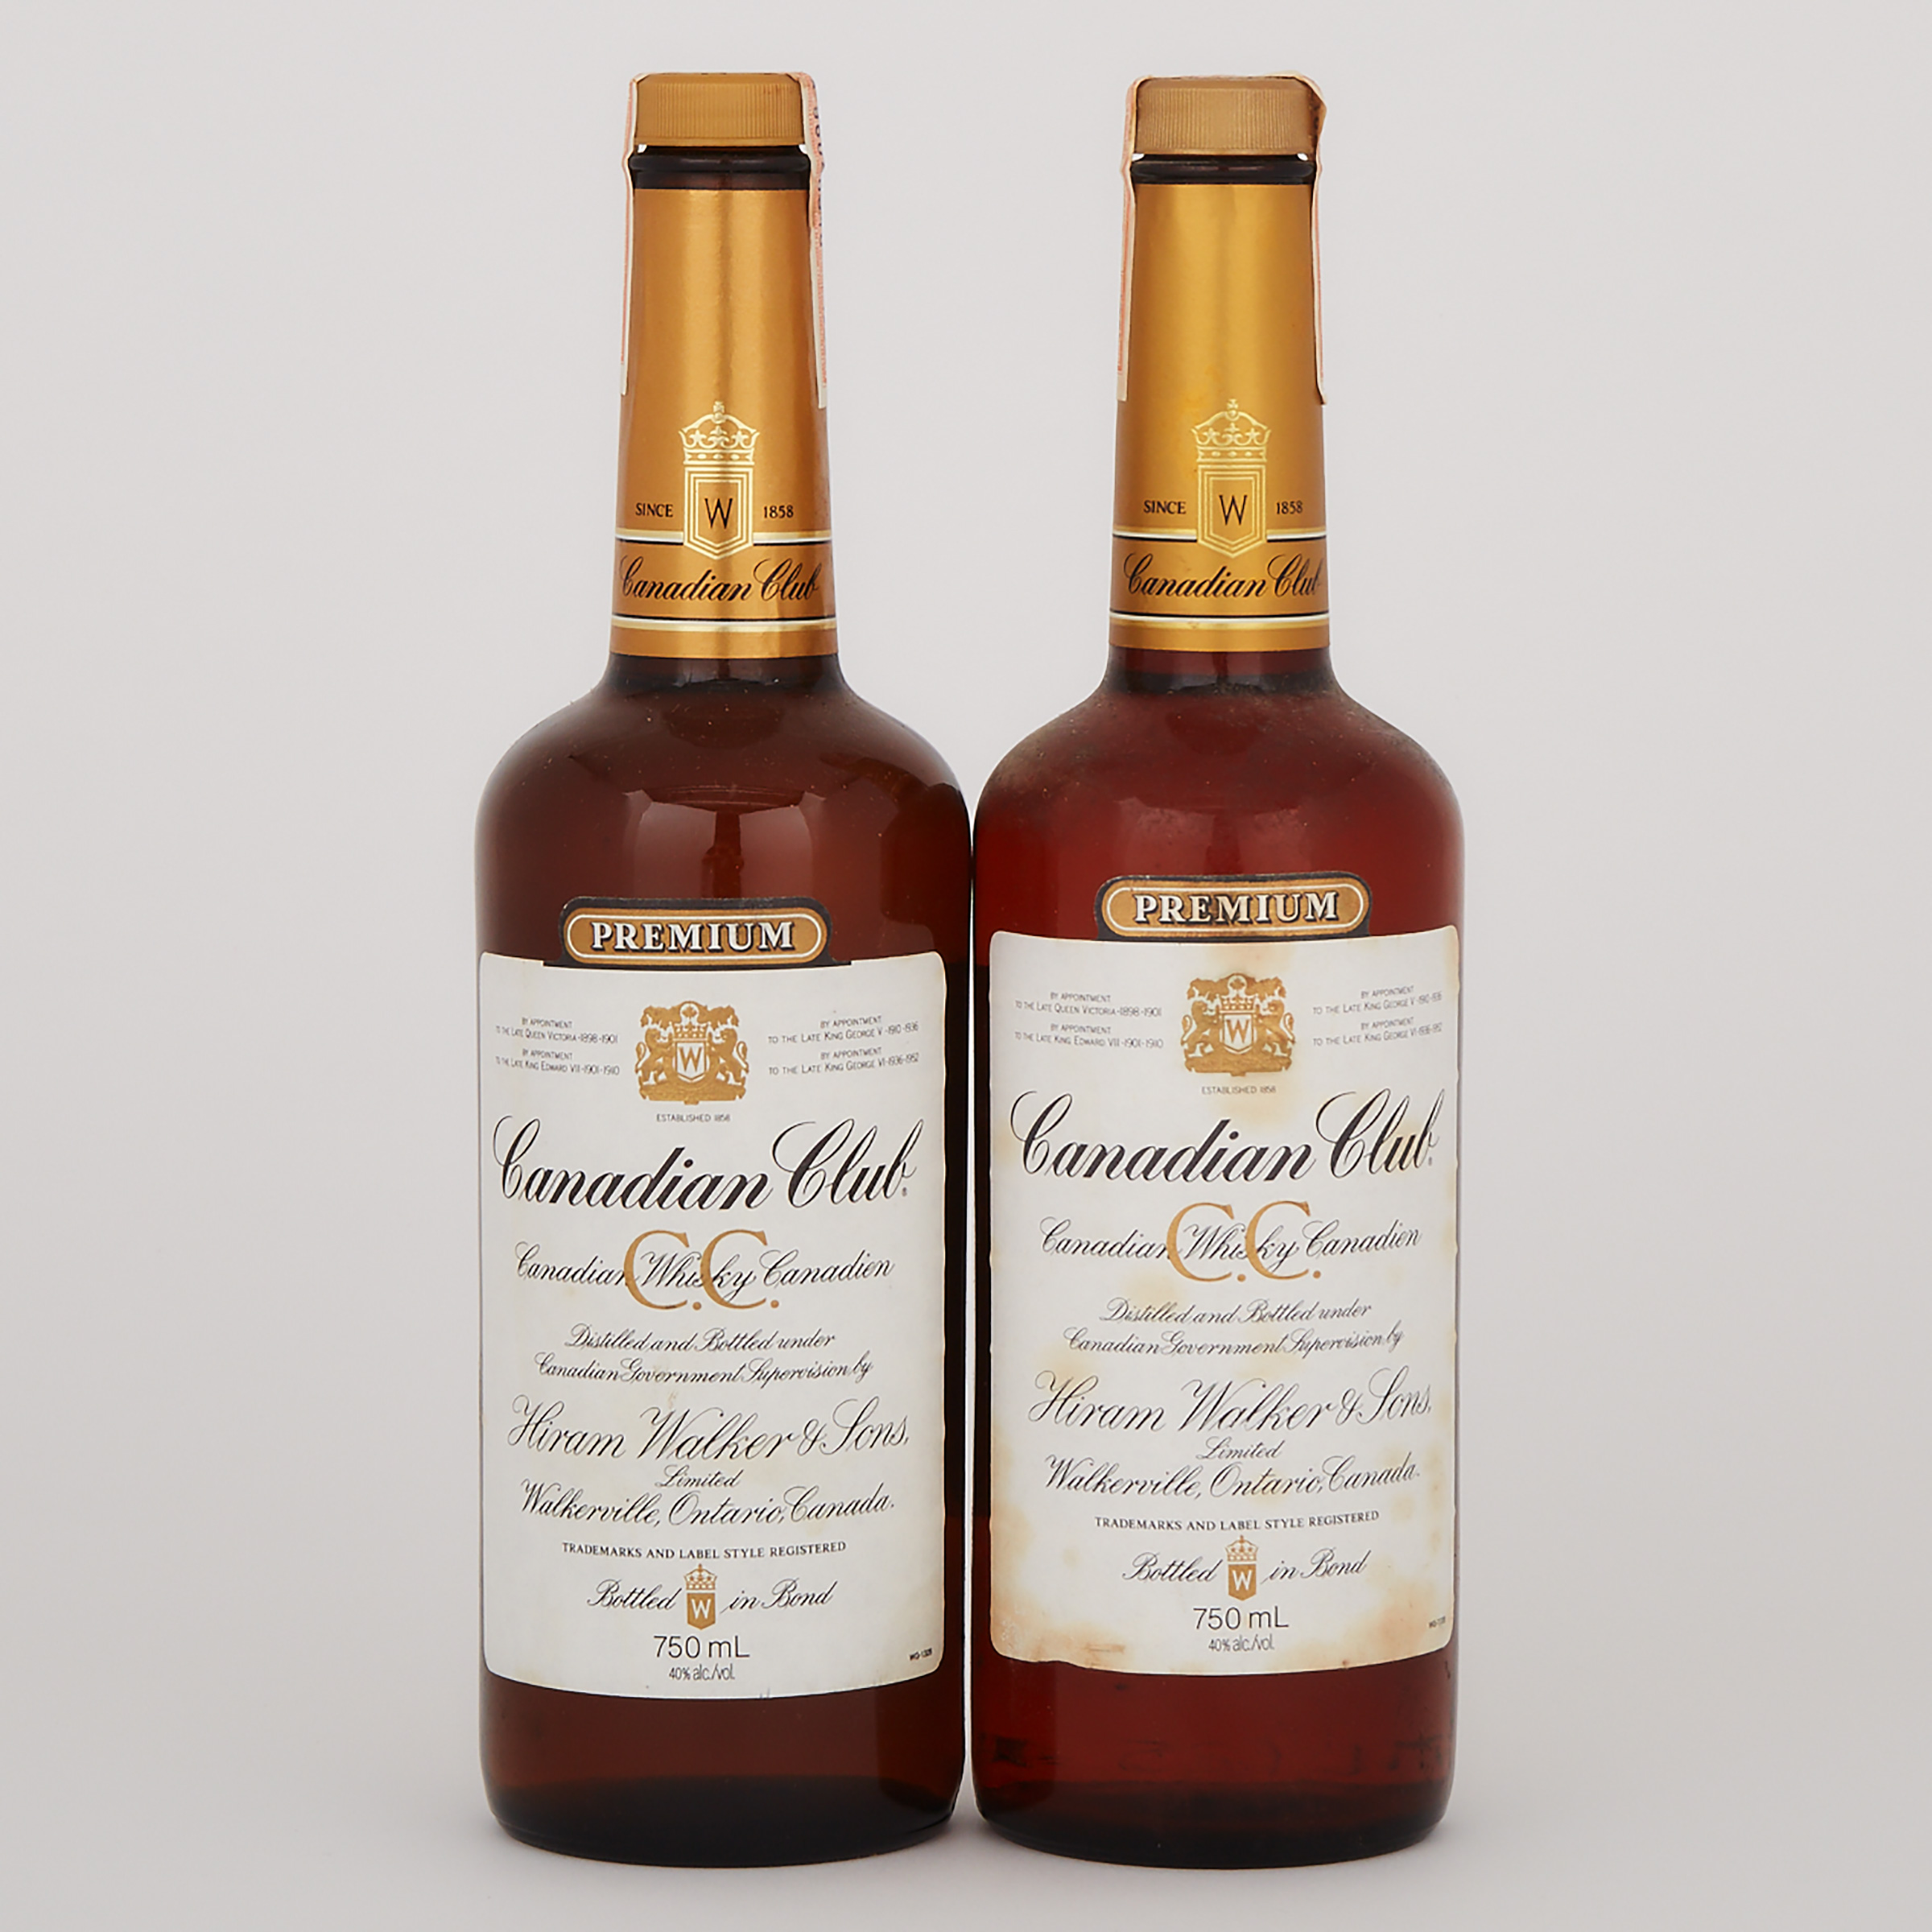 CANADIAN CLUB PREMIUM CANADIAN WHISKY (ONE 750 ML)
CANADIAN CLUB PREMIUM CANADIAN WHISKY (ONE 750 ML)